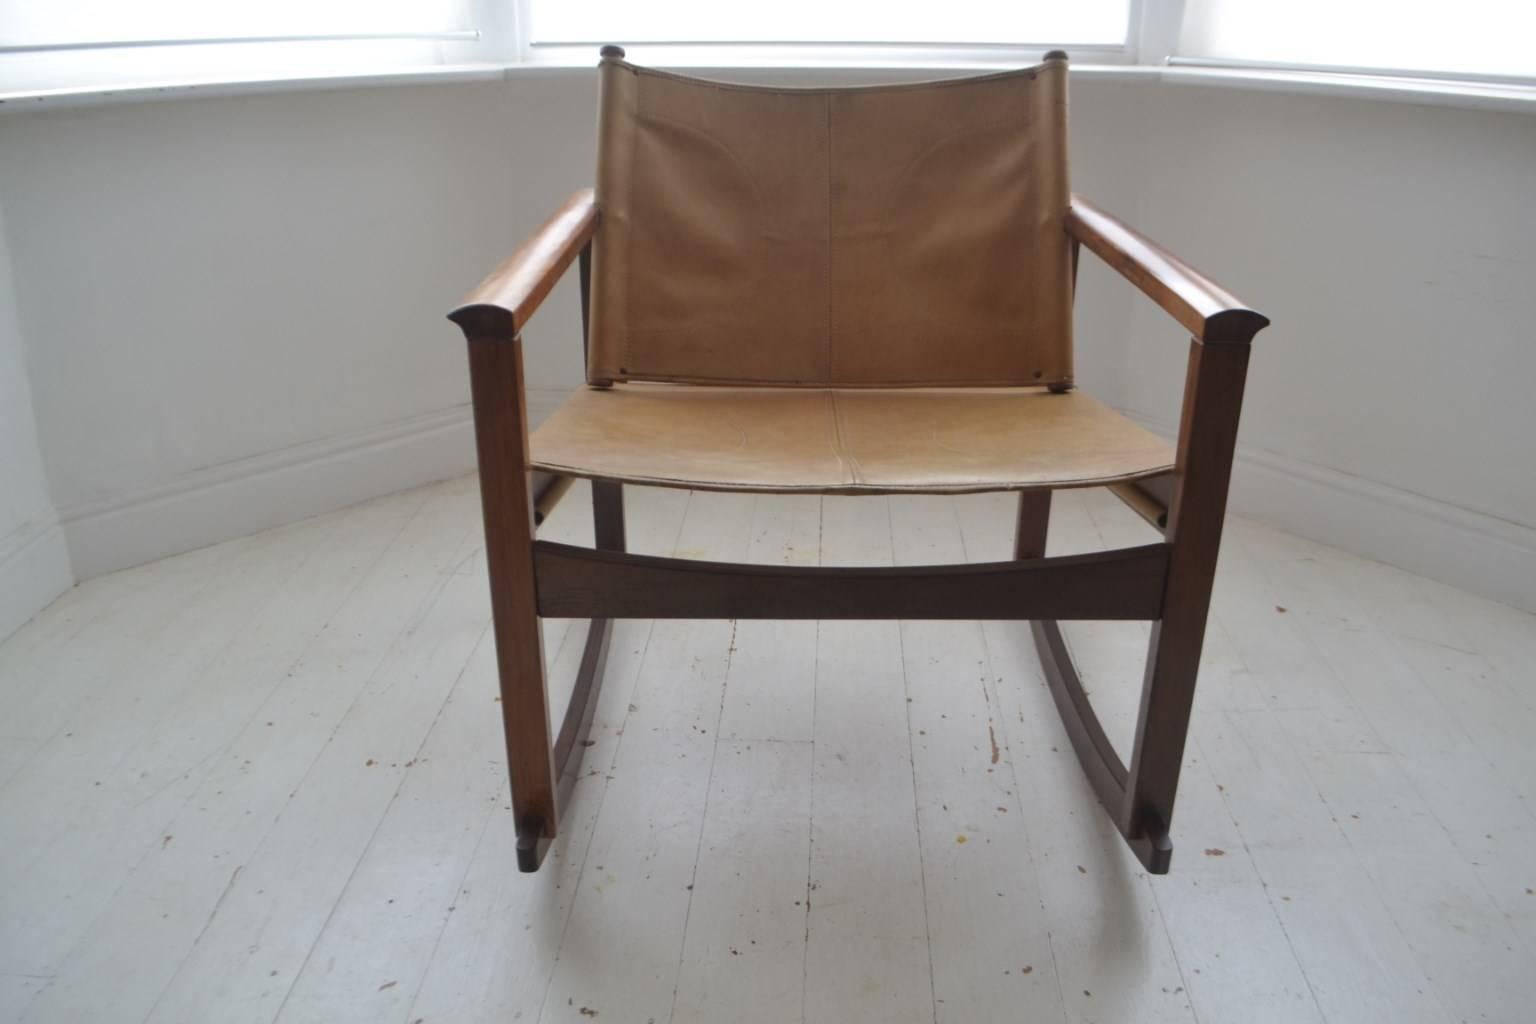 The rosewood and leather PegLev rocking chair was designed by French designer Michel Arnoult and manufactured in Brazil in 1968.